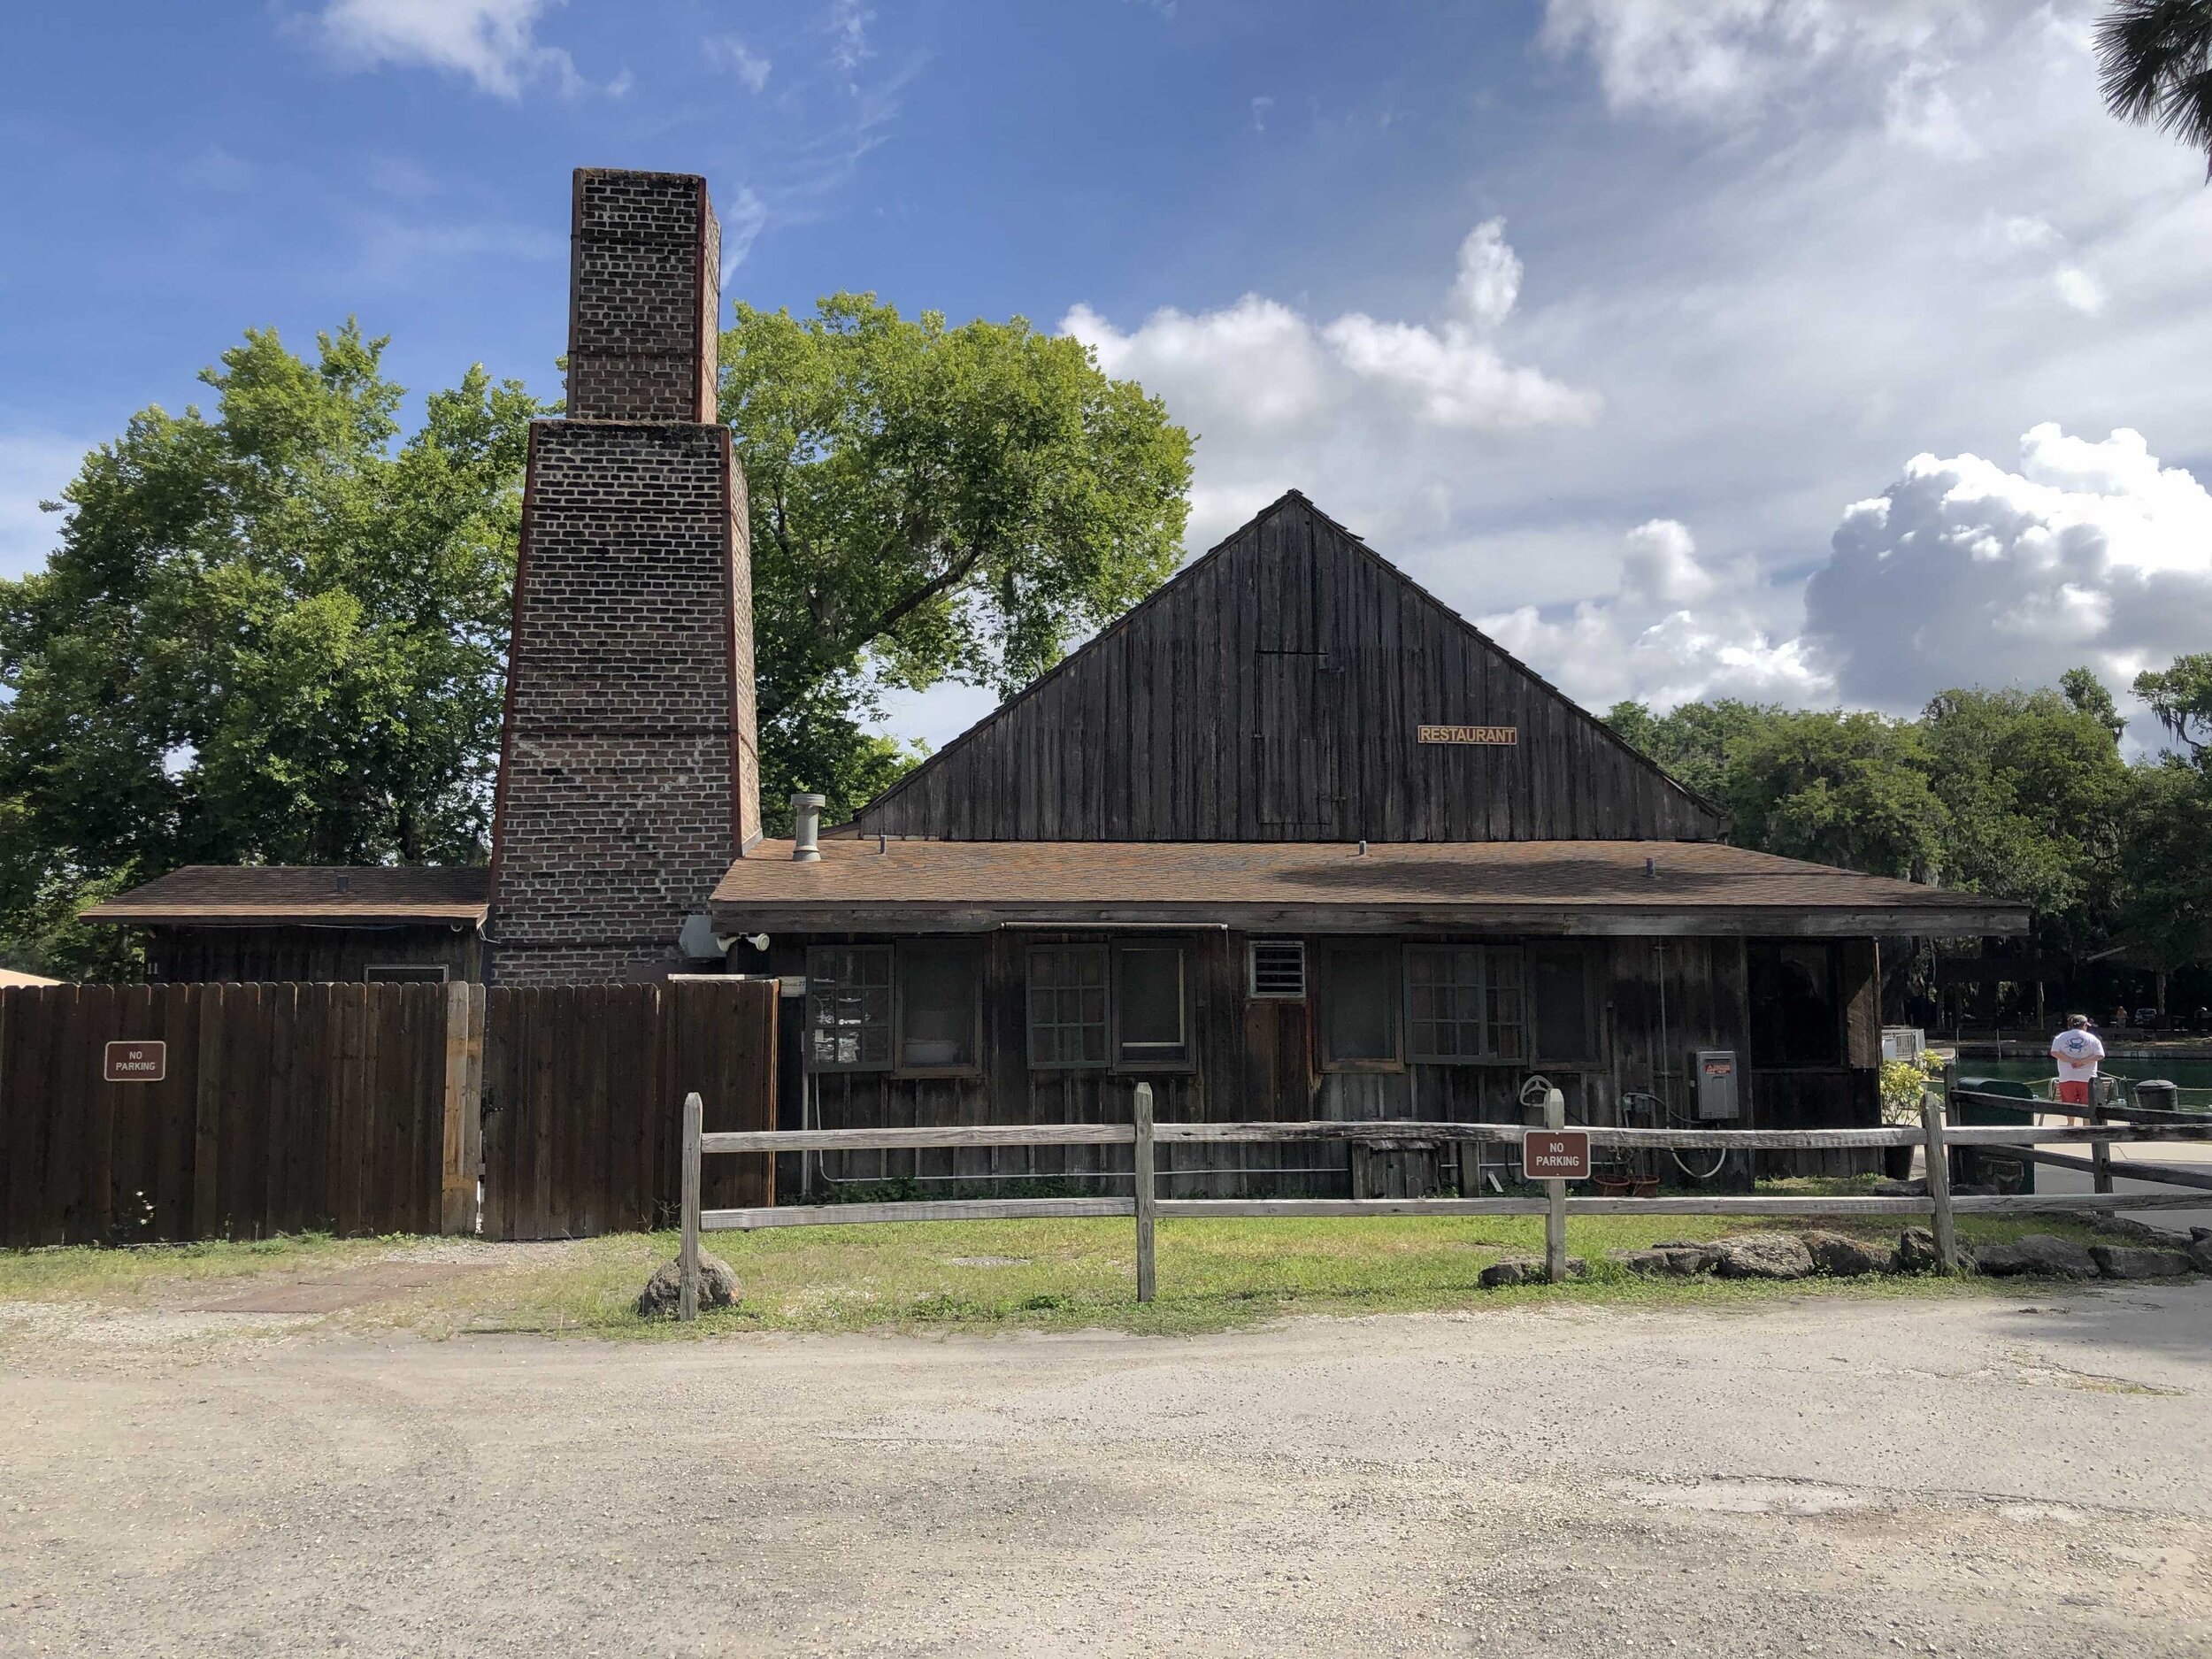  The Old Spanish Sugar Mill restaurant in DeLeon Springs State Park where you can make your own pancakes at your table.  